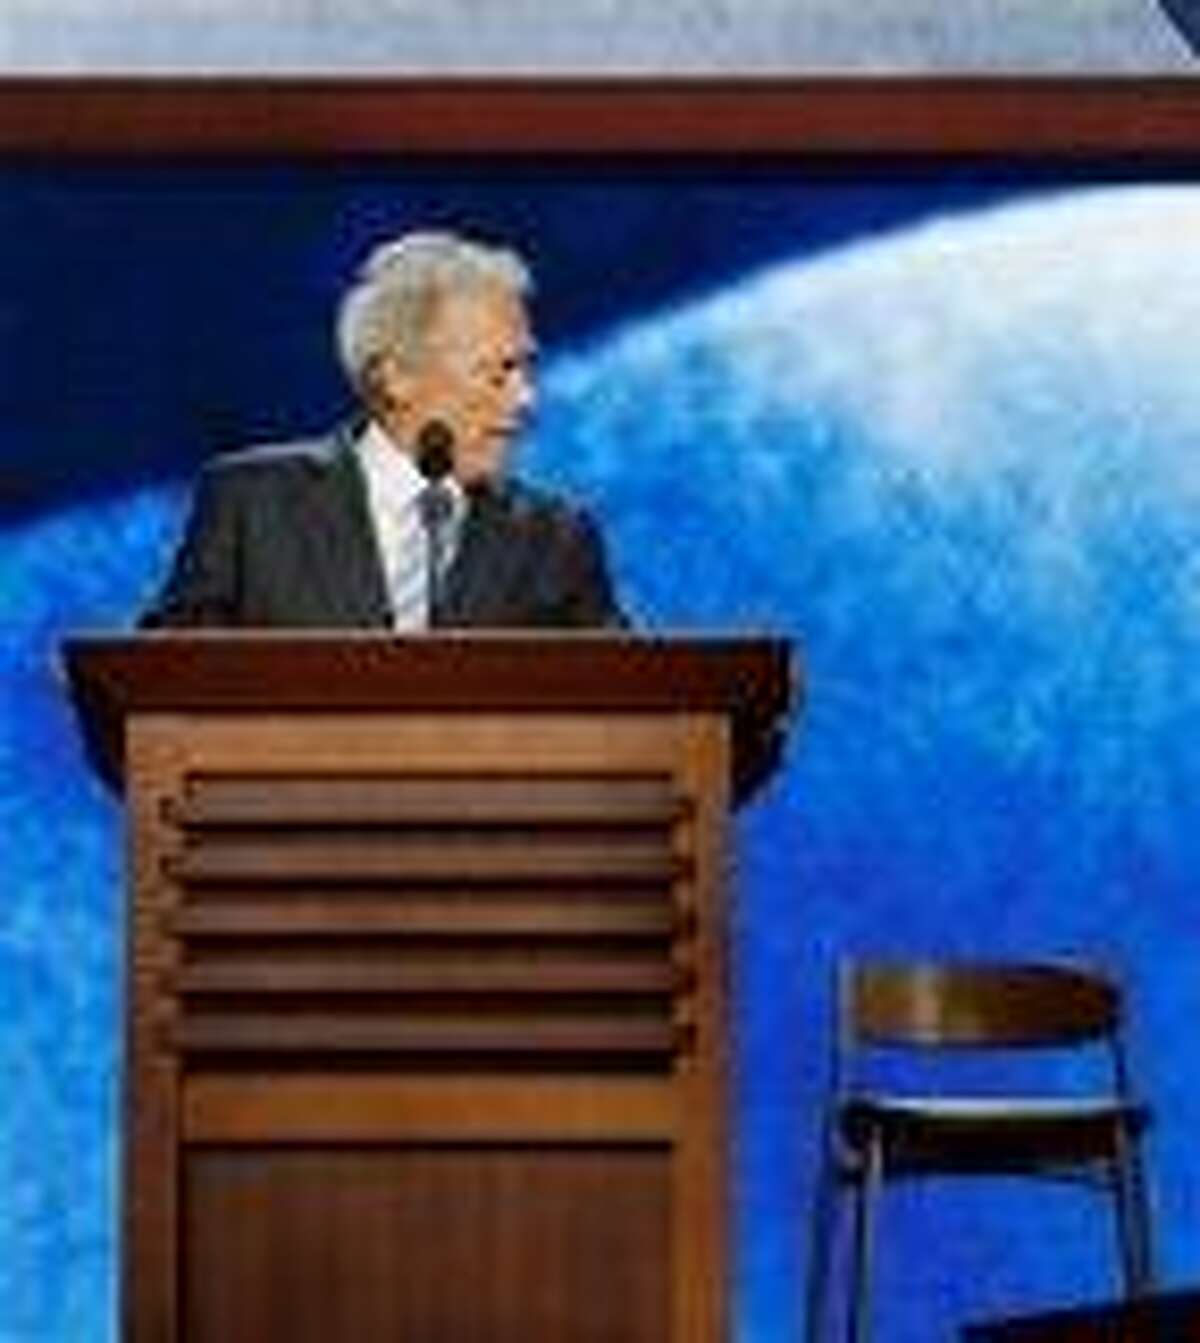 Actor Clint Eastwood addresses the Republican National Convention in Tampa, Fla., on Thursday, Aug. 30, 2012. (AP Photo/Charles Dharapak)